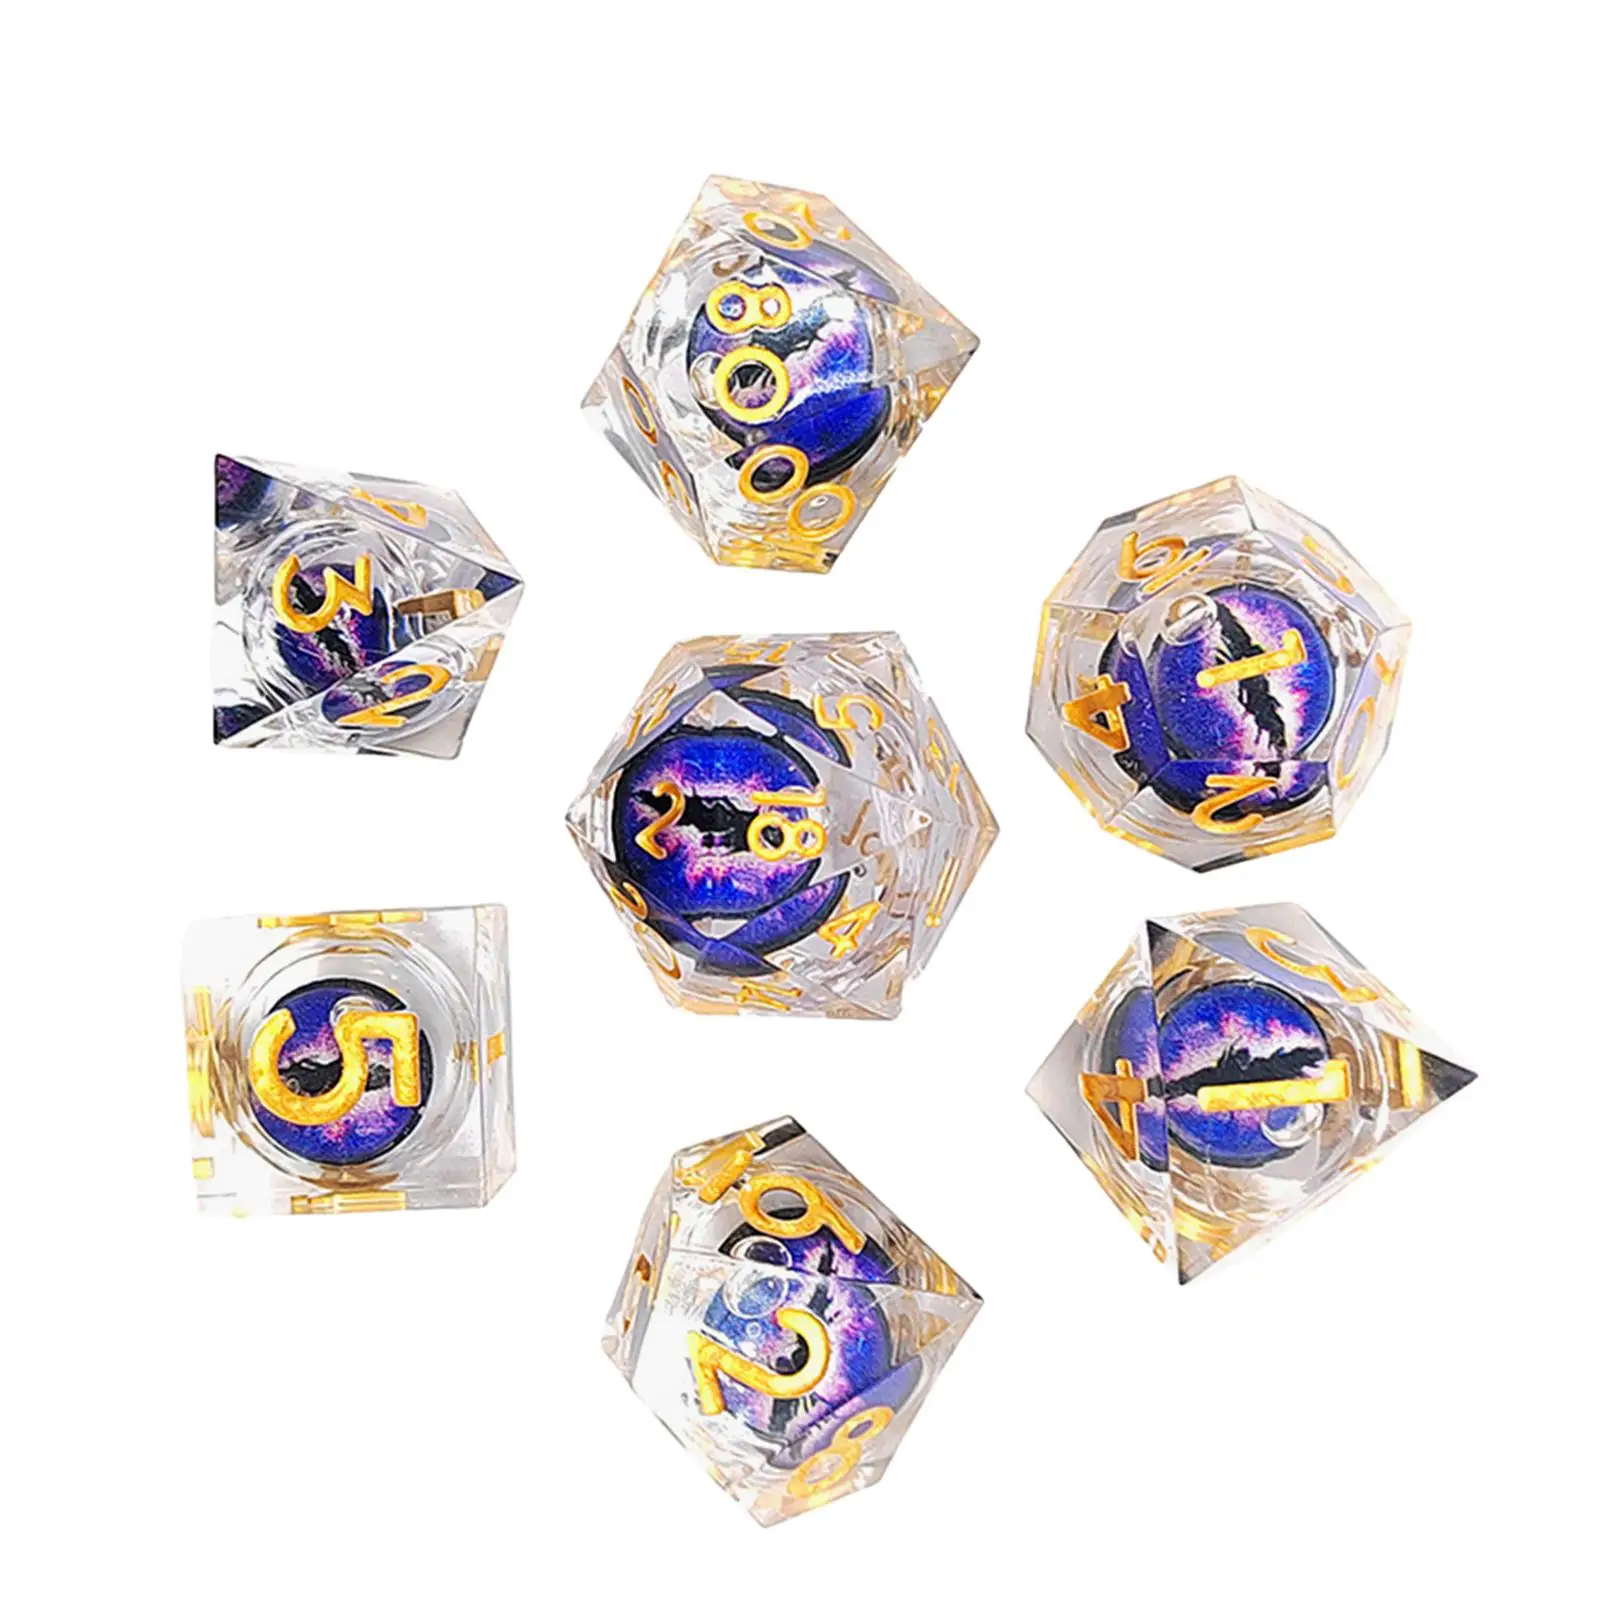 Resin Polyhedral Eye Dice 7Pcs Set Collection for Interactive Games